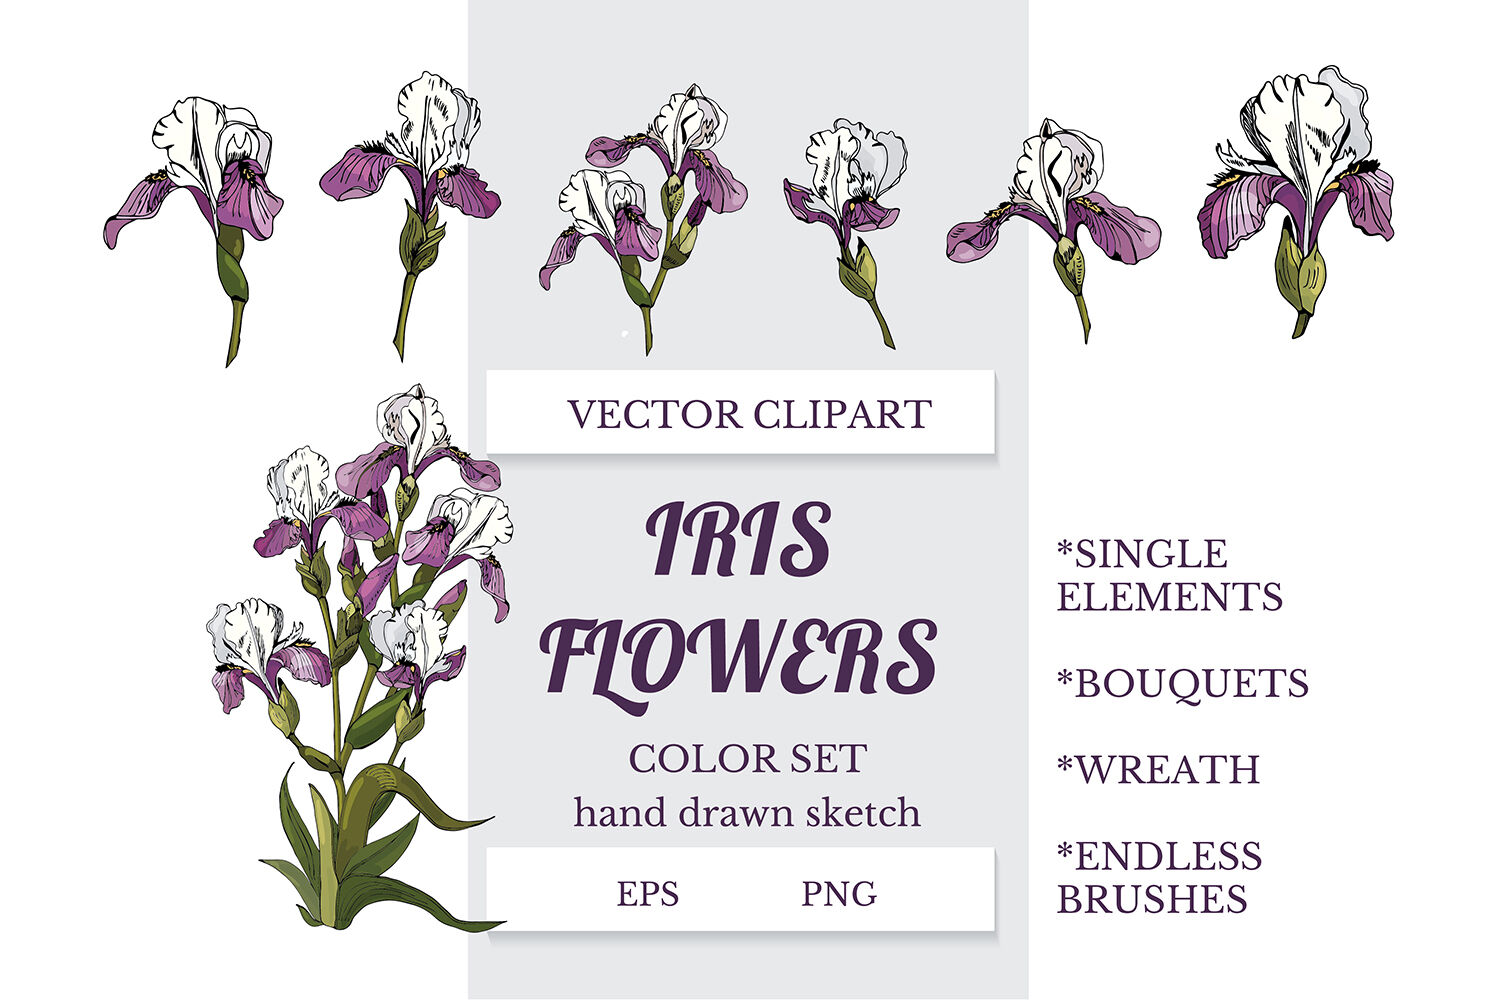 Hand Drawn Ink Sketch Of Iris Flowers Color Vector Elements By Mix4garden Thehungryjpeg Com